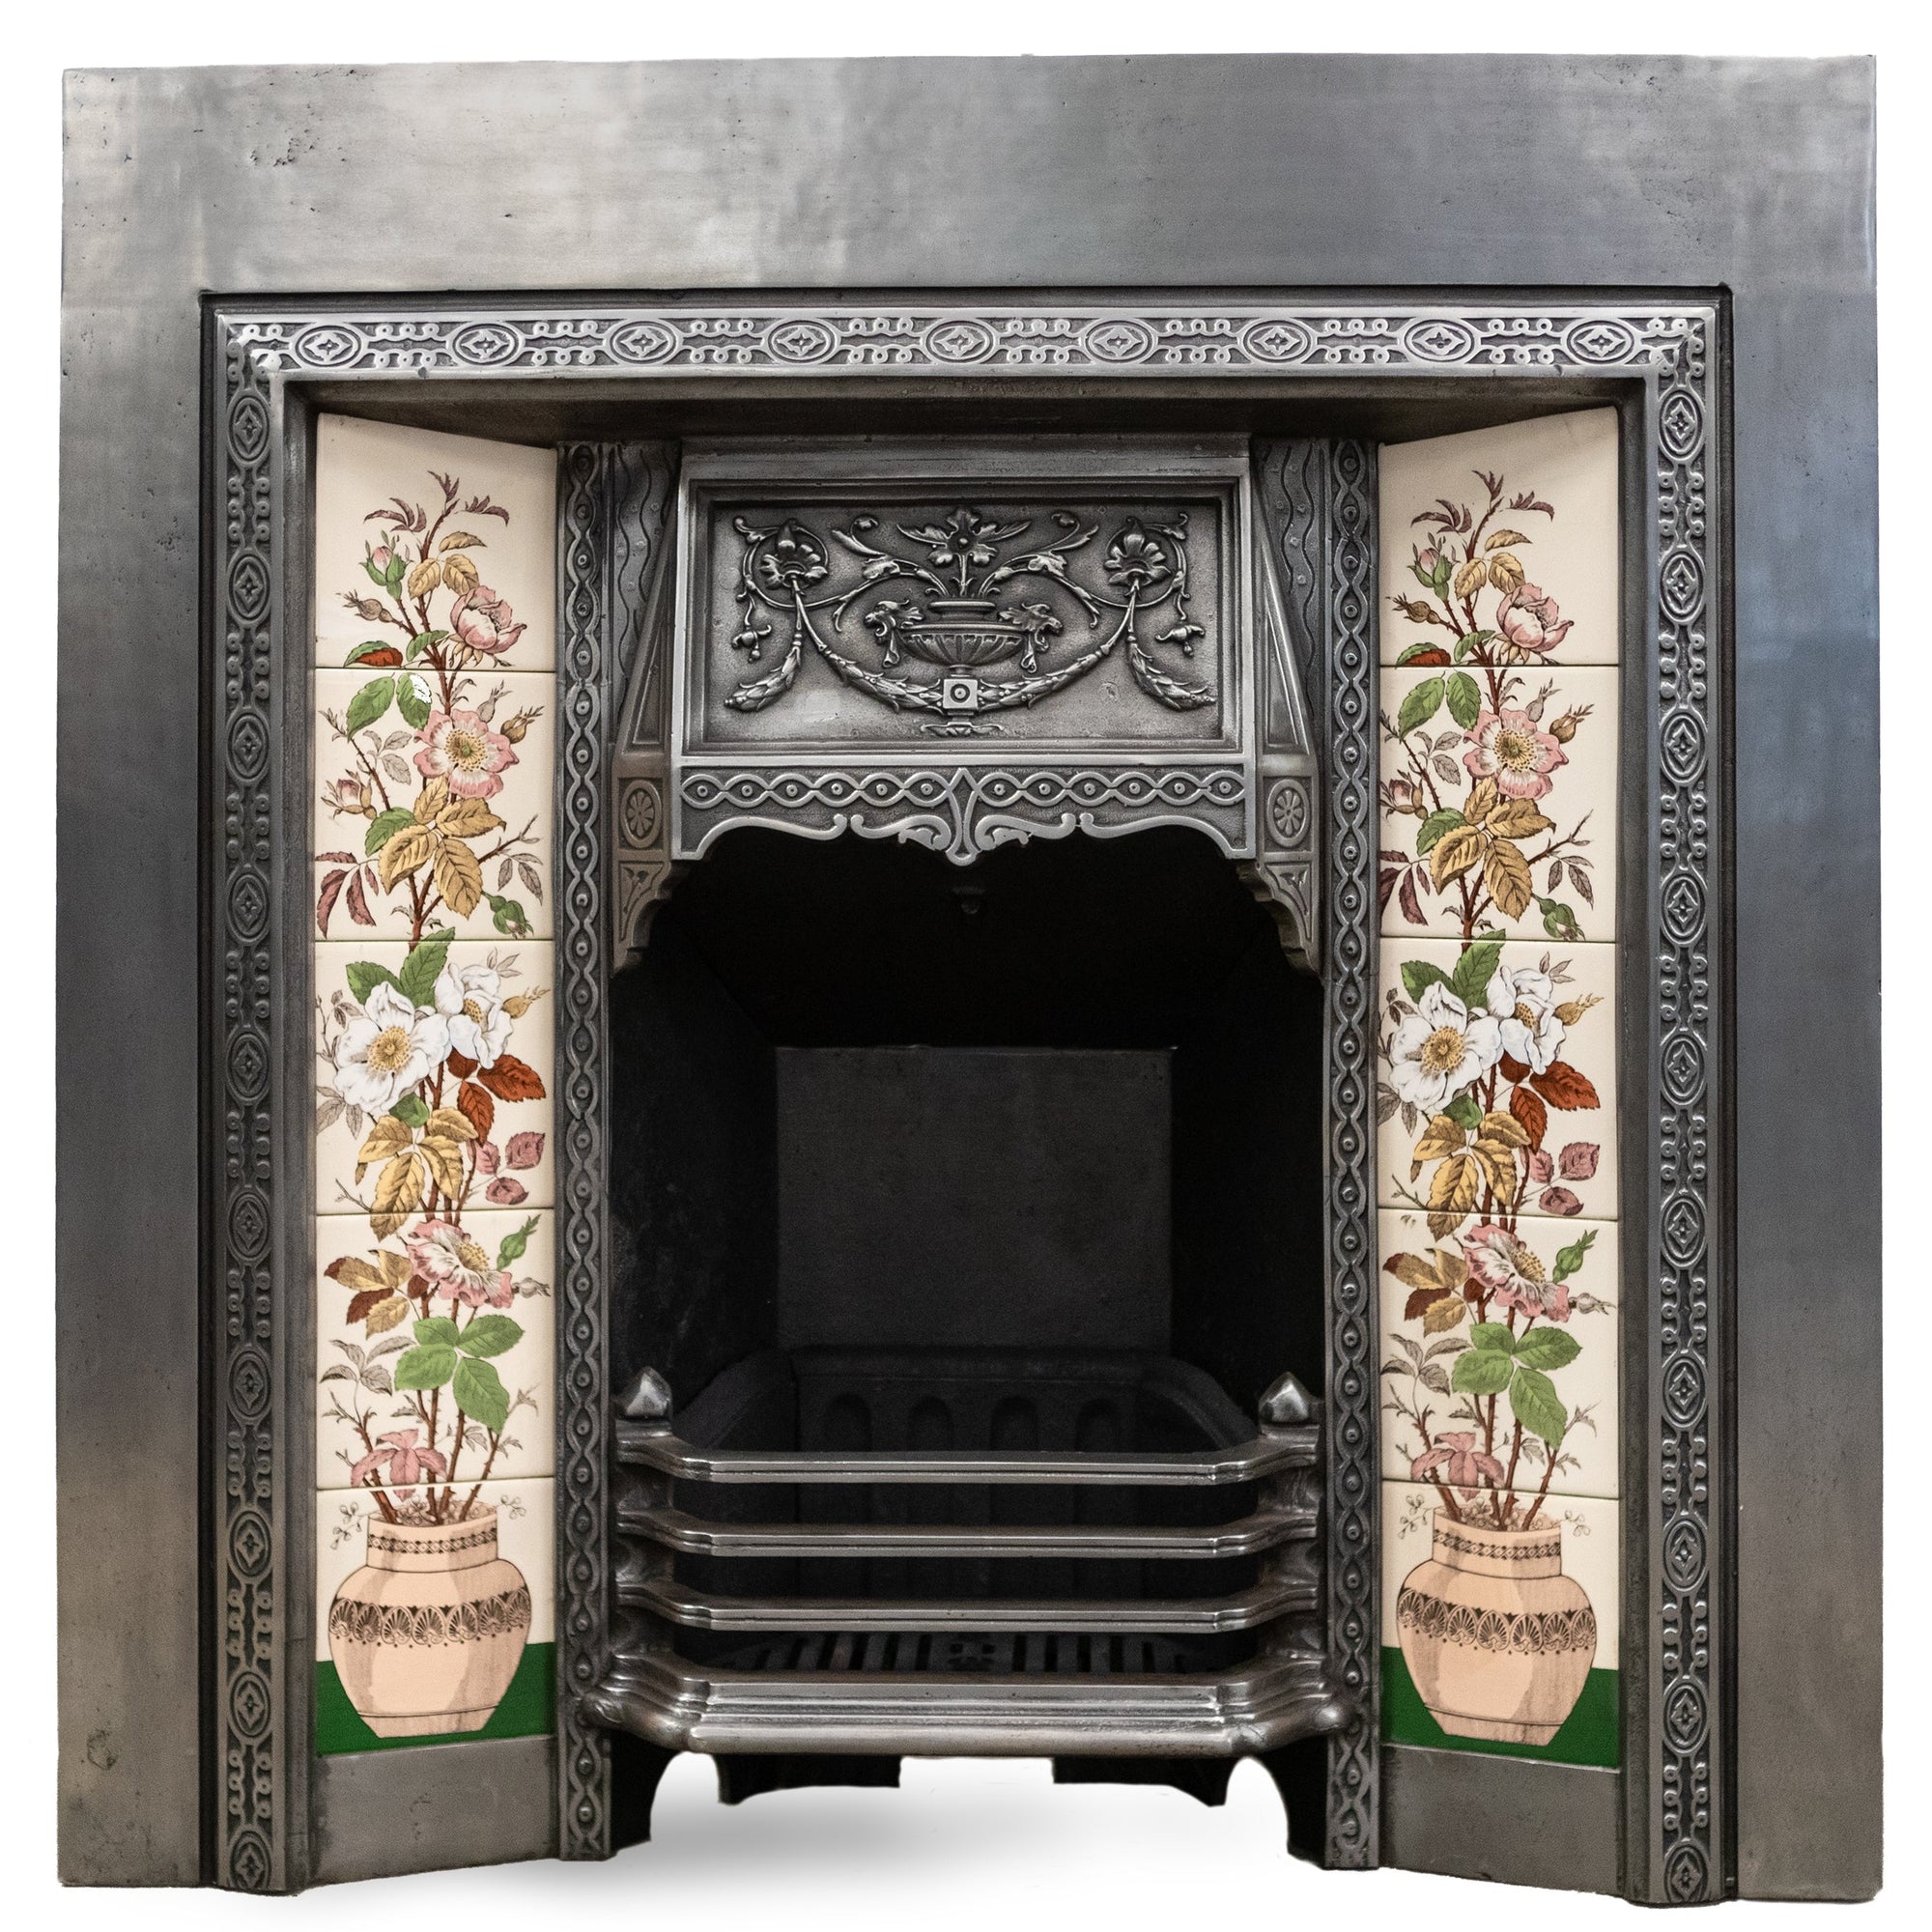 Reclaimed Polished Fireplace Insert with Tiles | The Architectural Forum